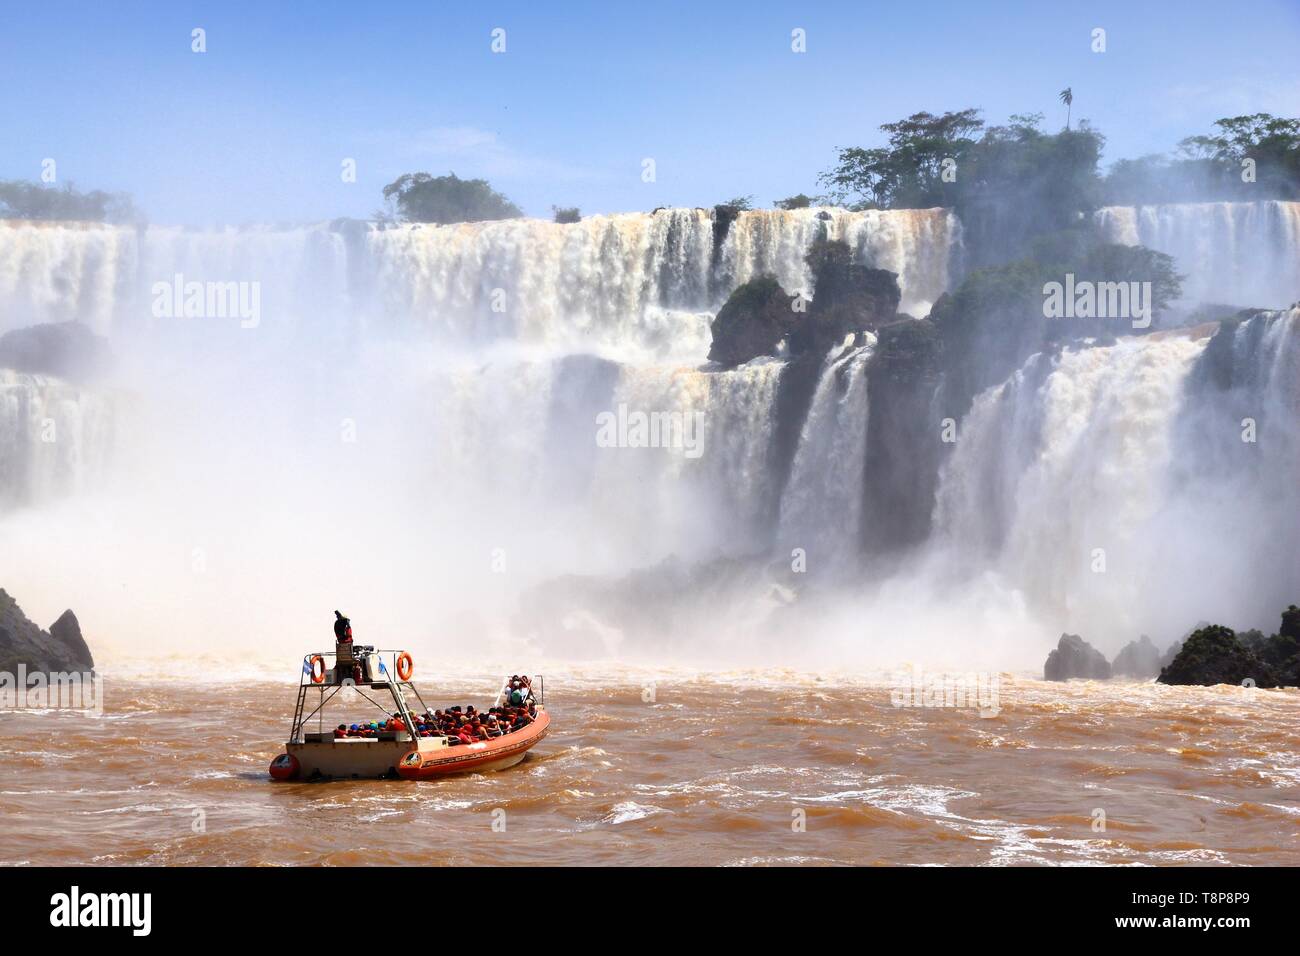 IGUAZU NATIONAL PARK, ARGENTINA - OCTOBER 10, 2014: People enjoy boat tour of Iguazu National Park in Argentina. The park was established in 1934 and  Stock Photo